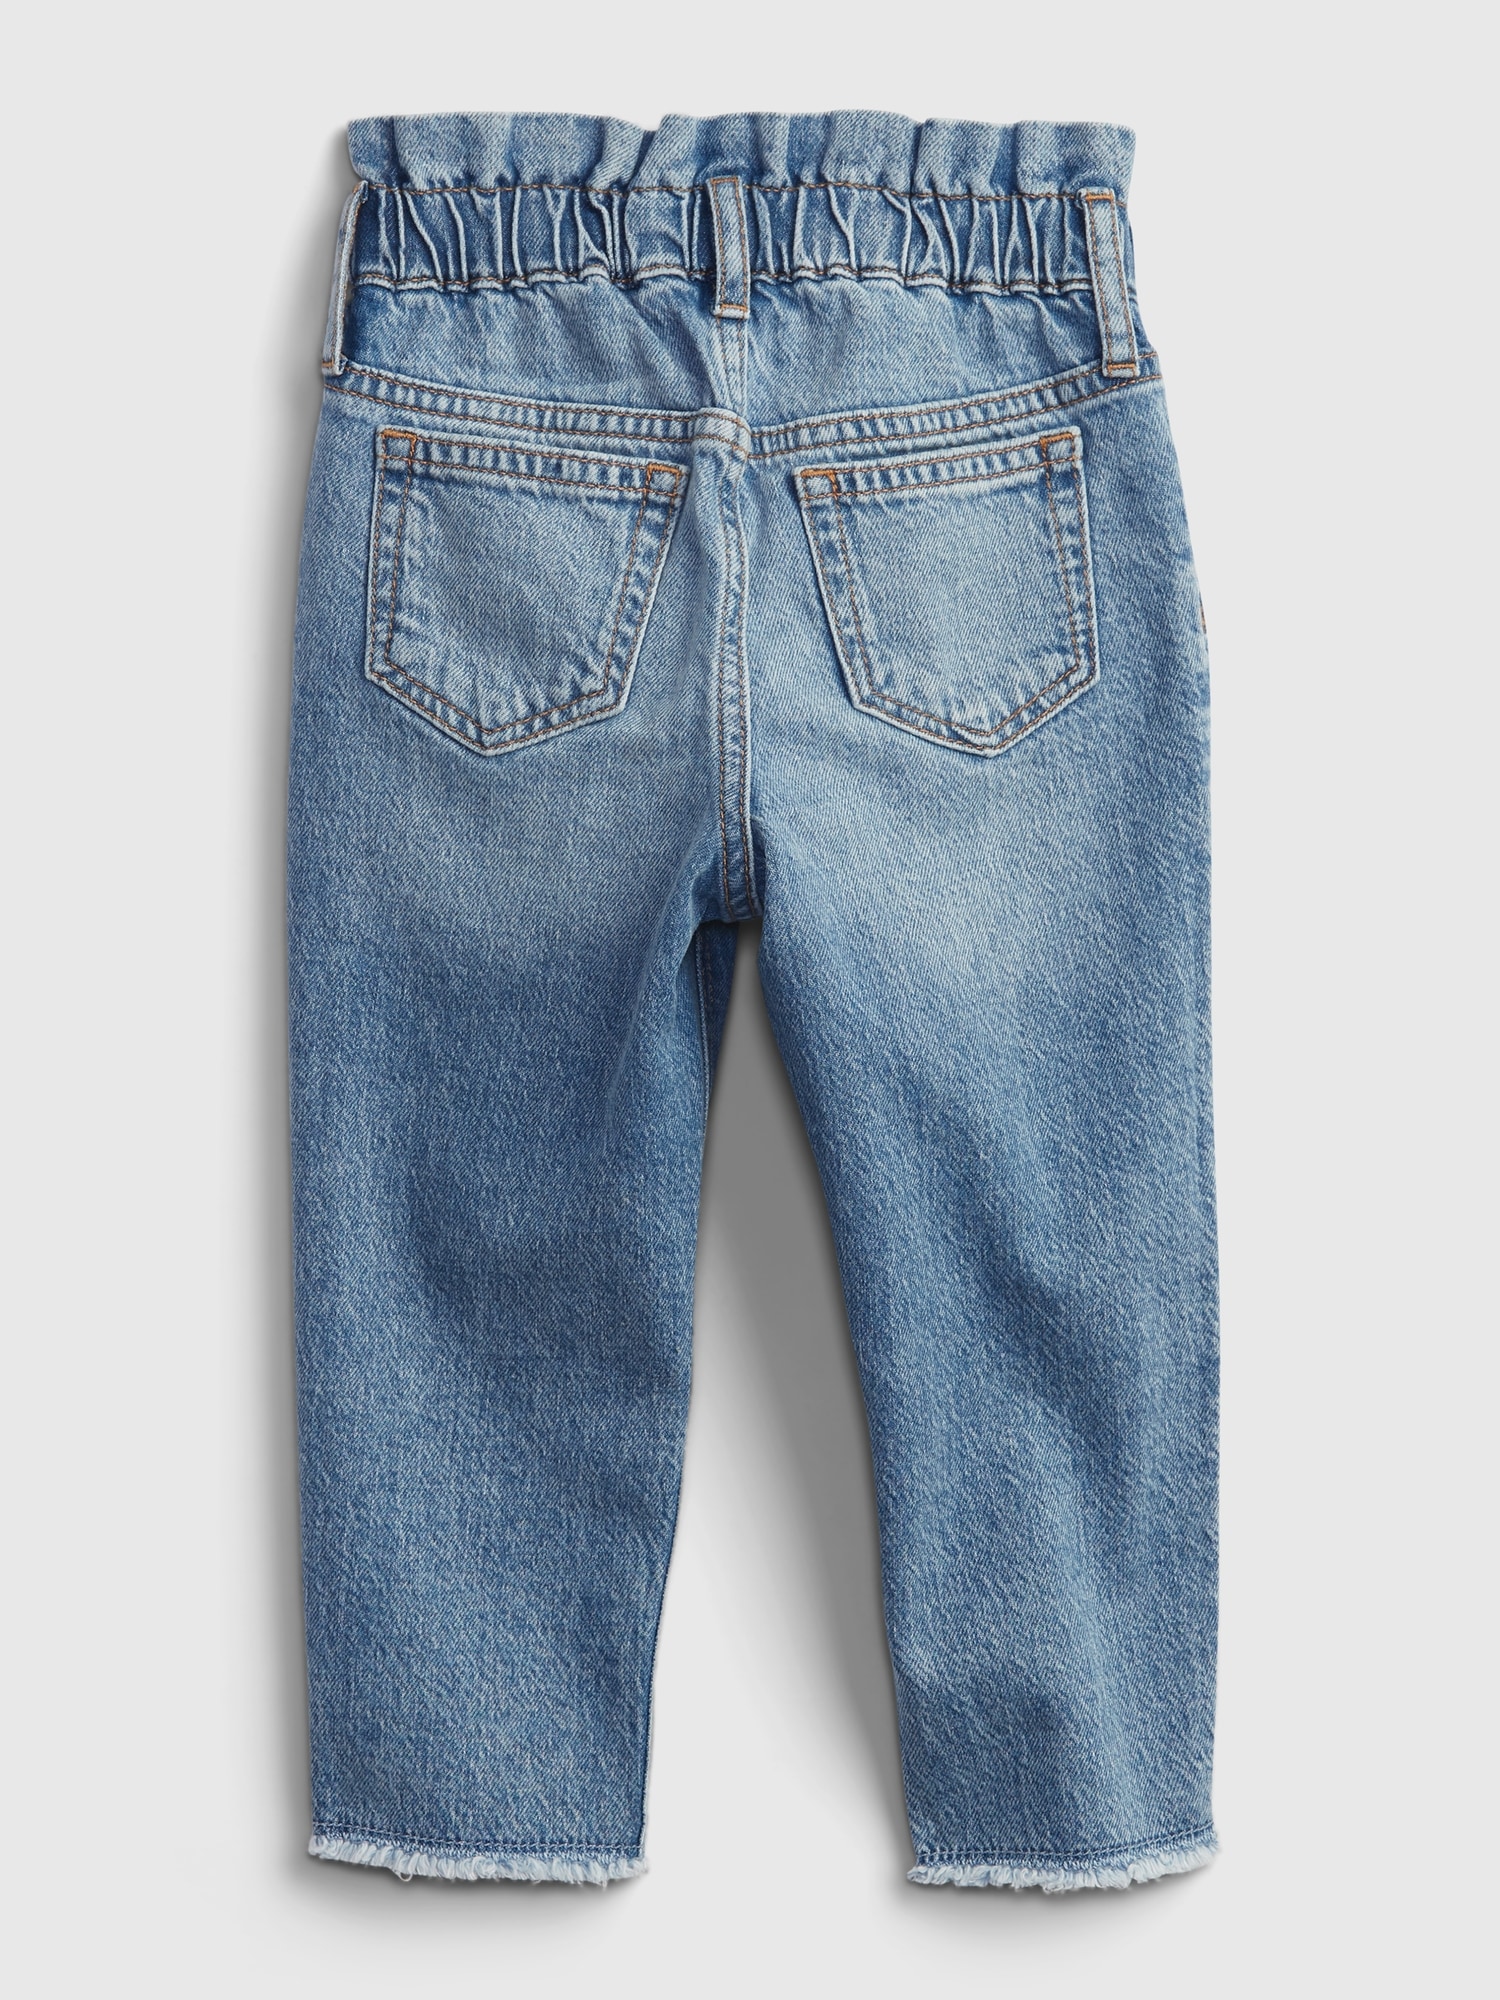 ferry Digital regiment Toddler Pull-On Just Like Mom Jeans with Washwell™ | Gap